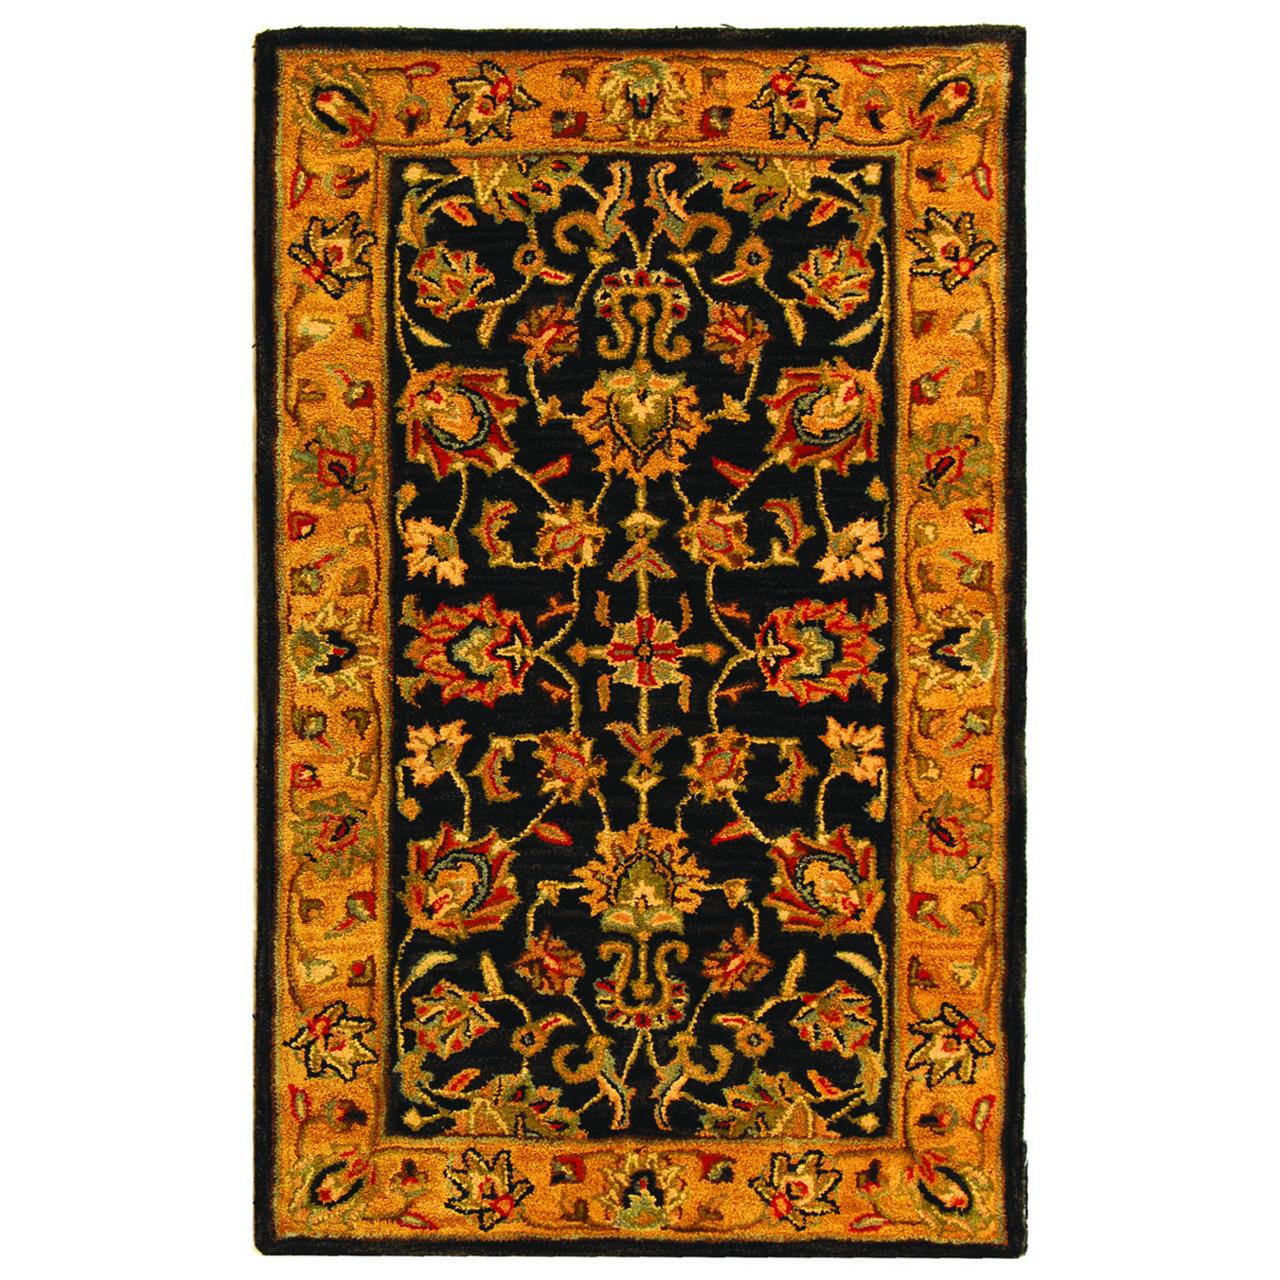 SAFAVIEH Heritage Regis Traditional Wool Area Rug, Charcoal/Gold, 3' x 5' - image 1 of 10